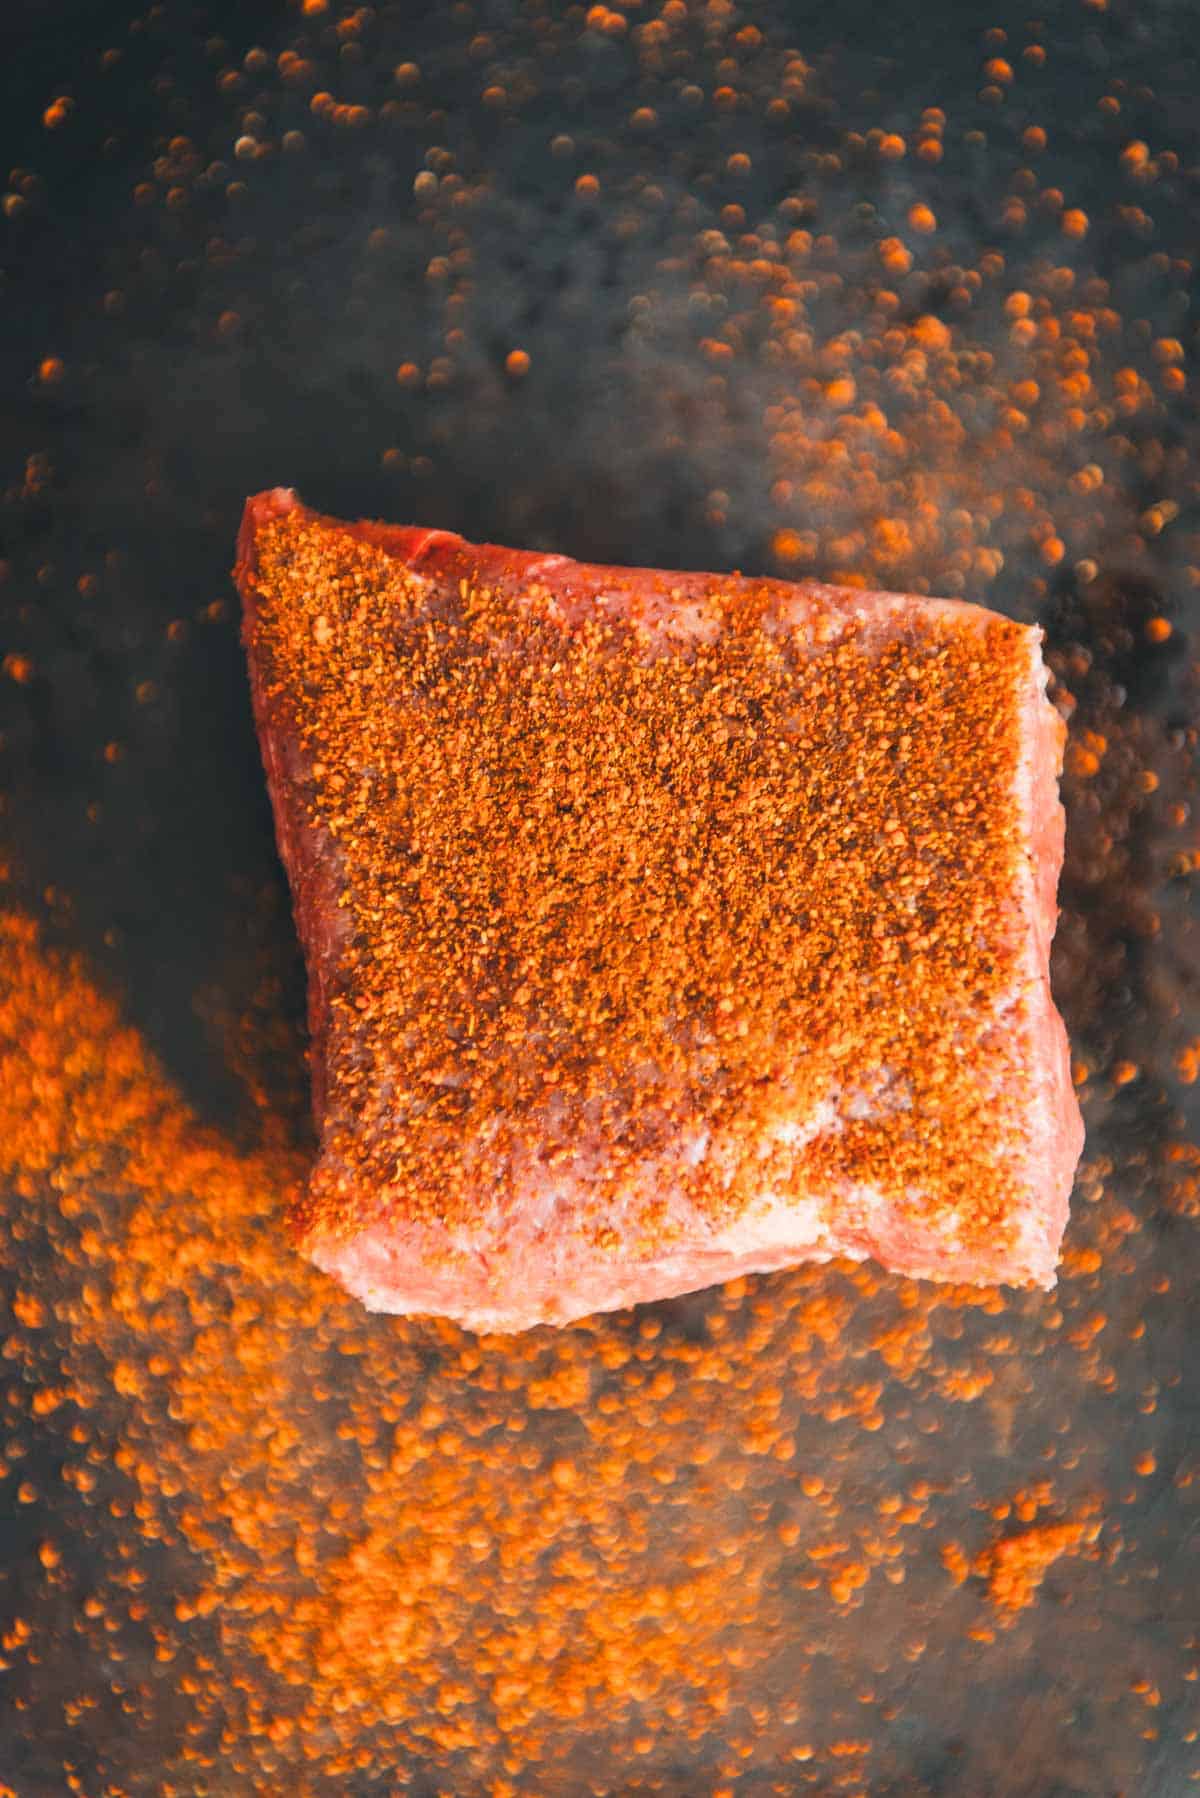 A denver steak coated in spices.